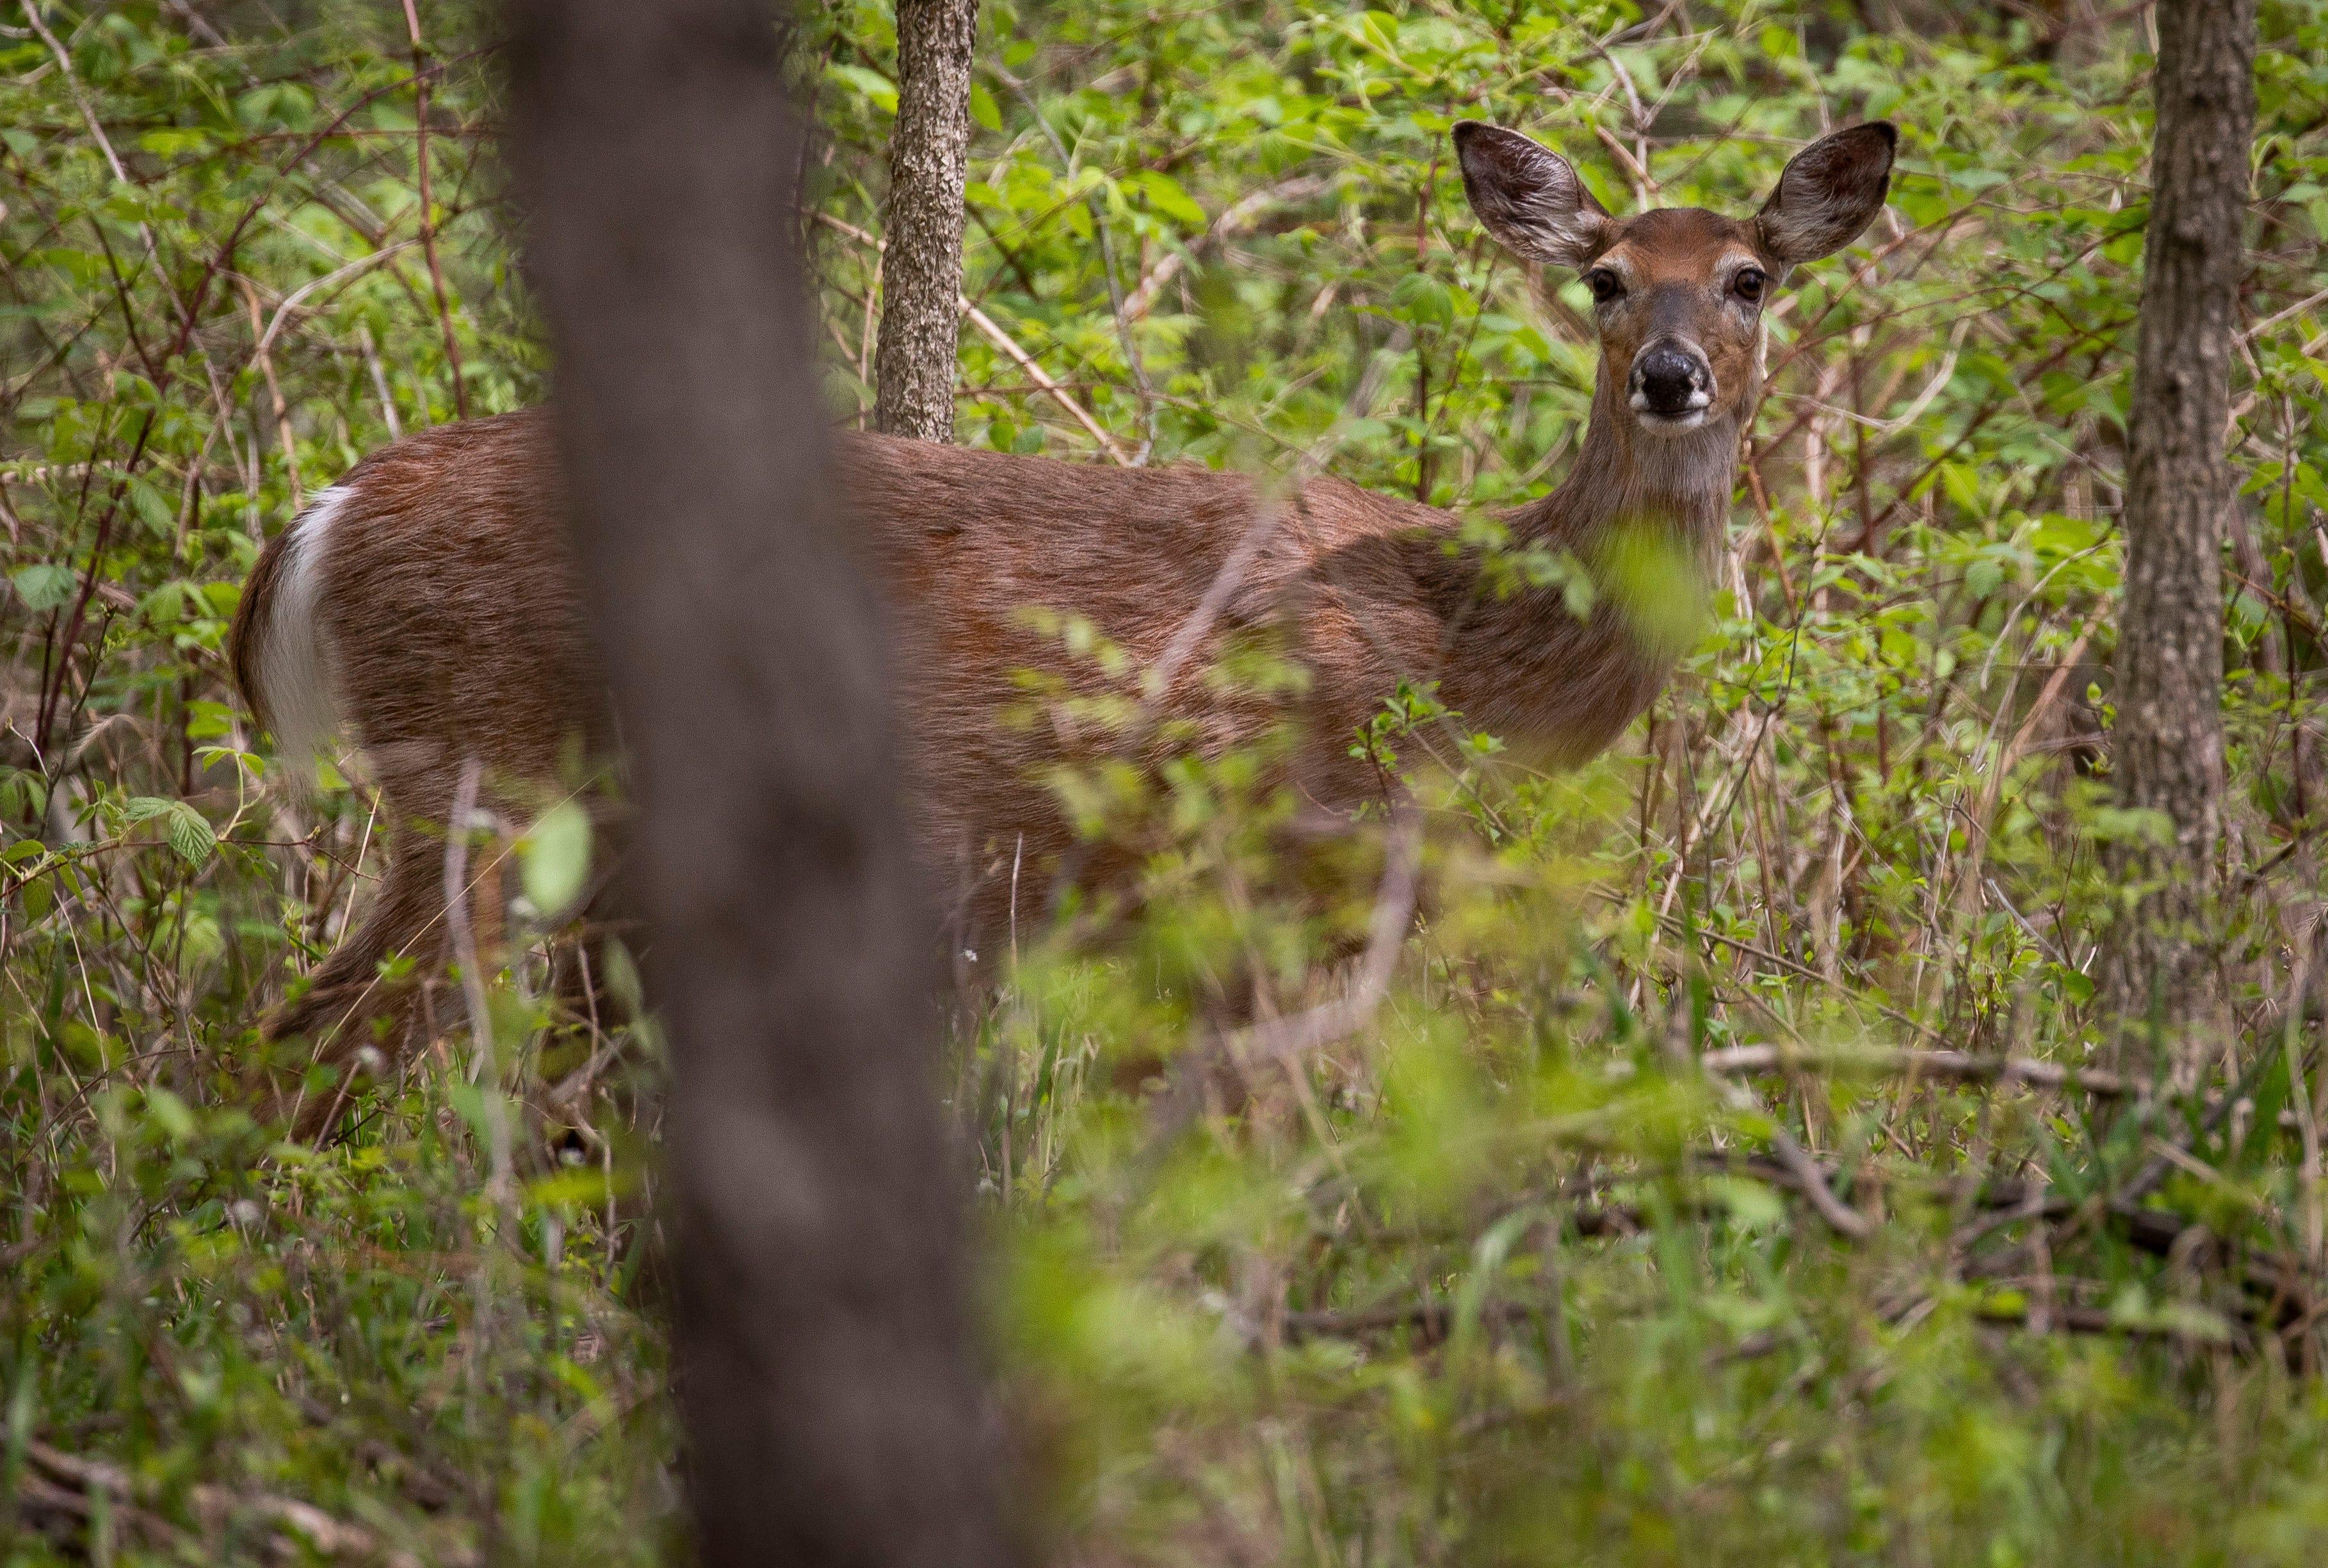 A white-tailed deer peeks through the trees at the Kensington Metropark.